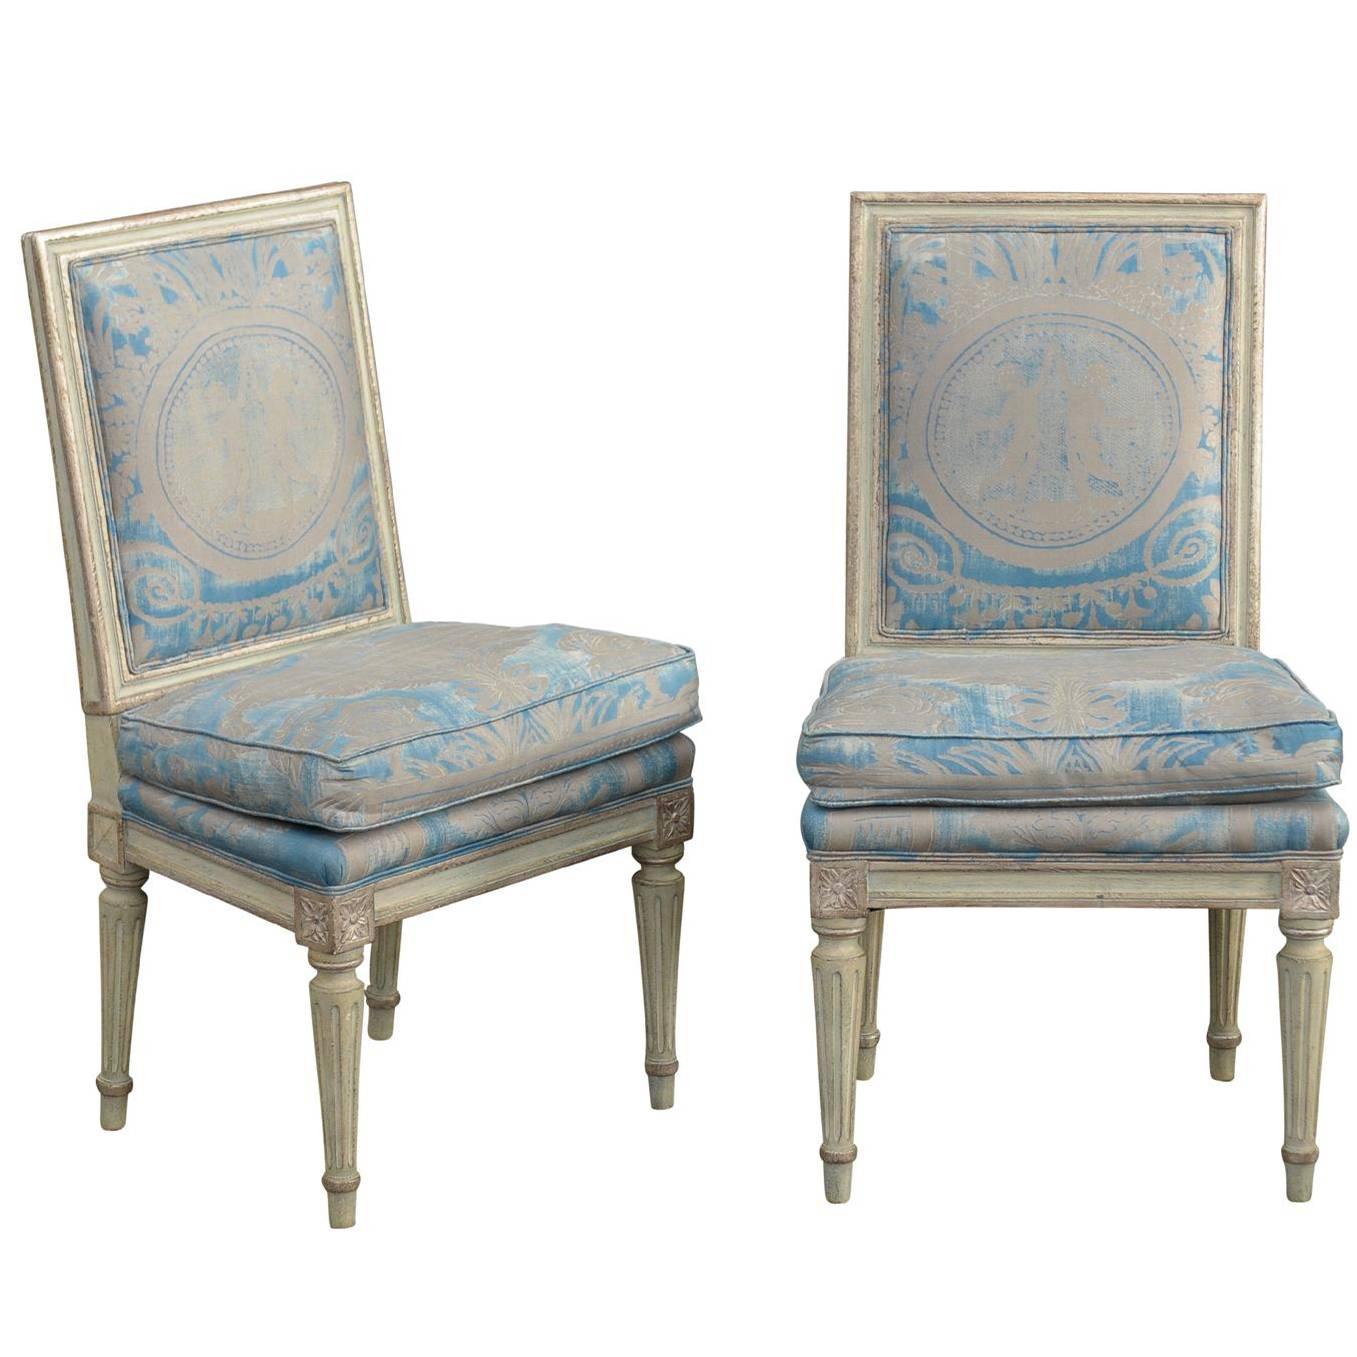 Pair of French Louis XVI Style Slipper Chairs with Fortuny Fabric, circa 1920